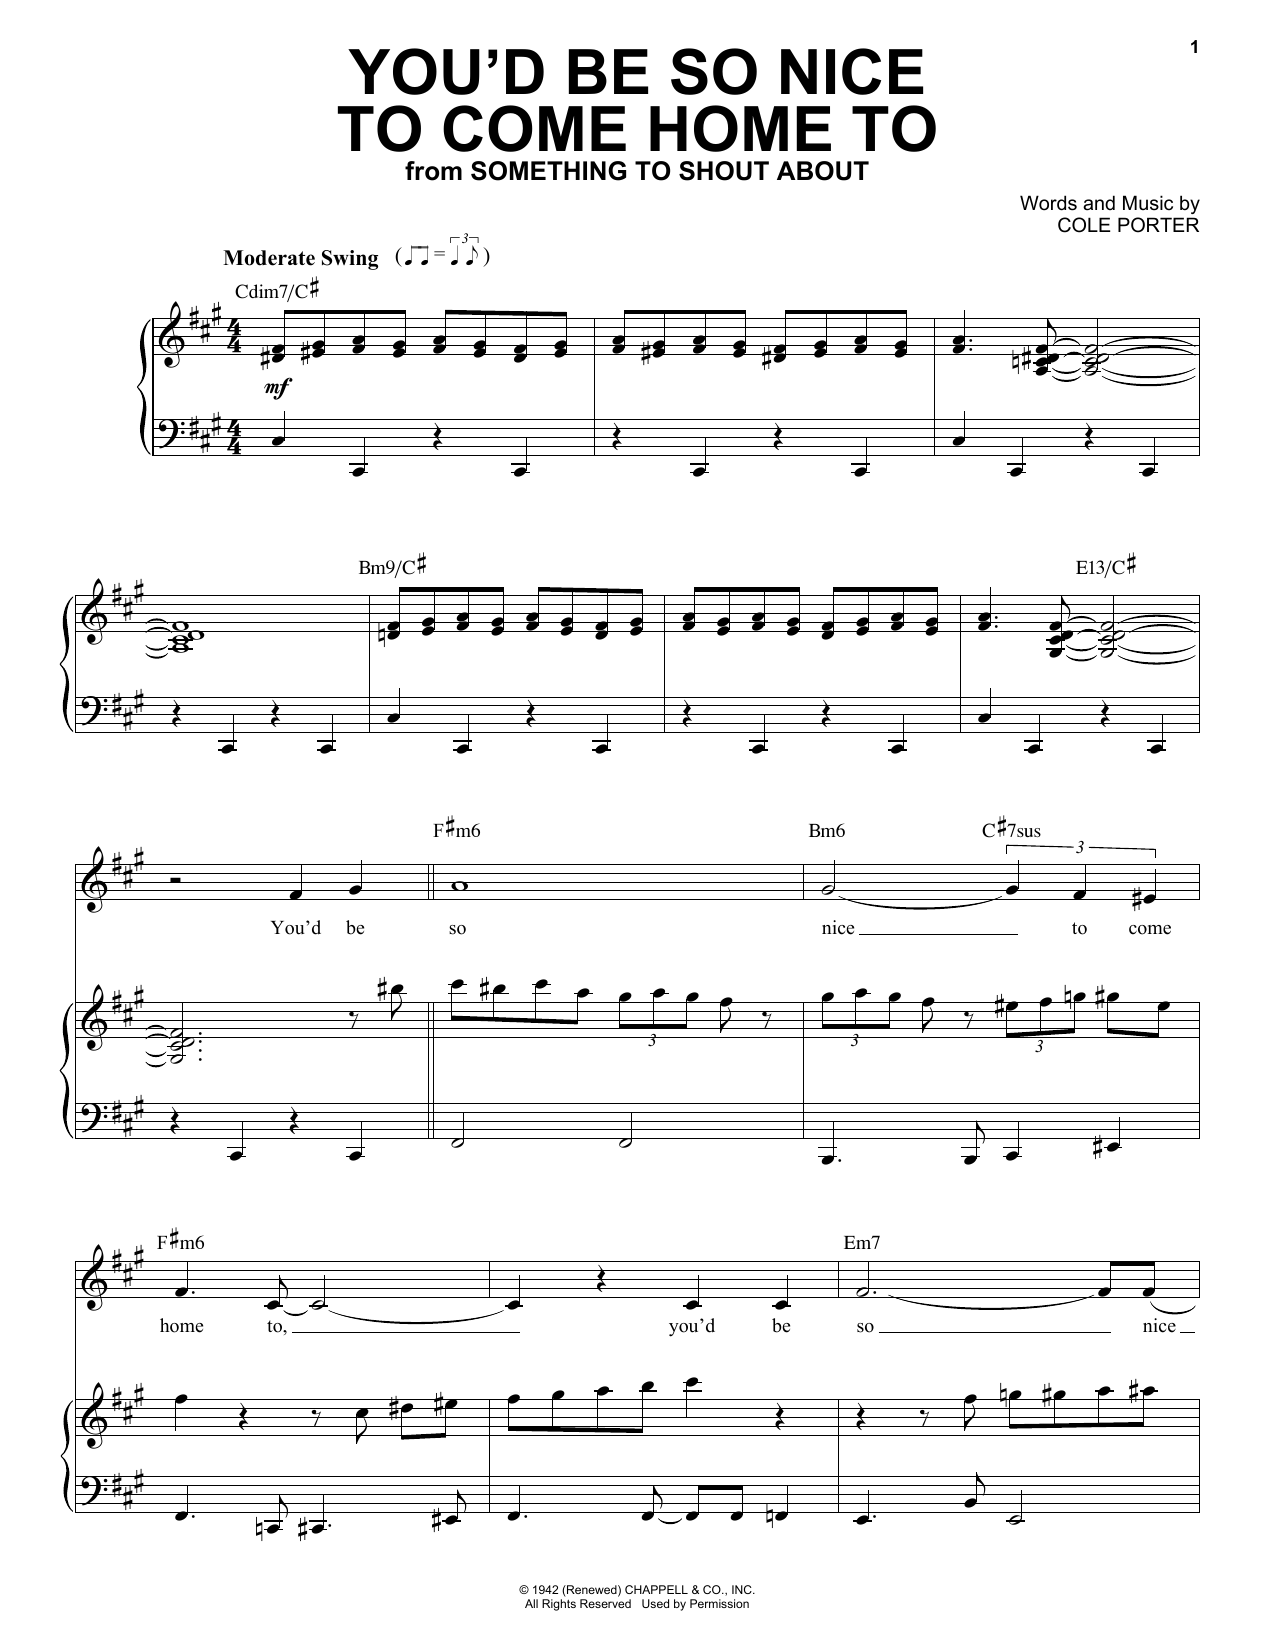 Frank Sinatra You'd Be So Nice To Come Home To sheet music notes and chords. Download Printable PDF.